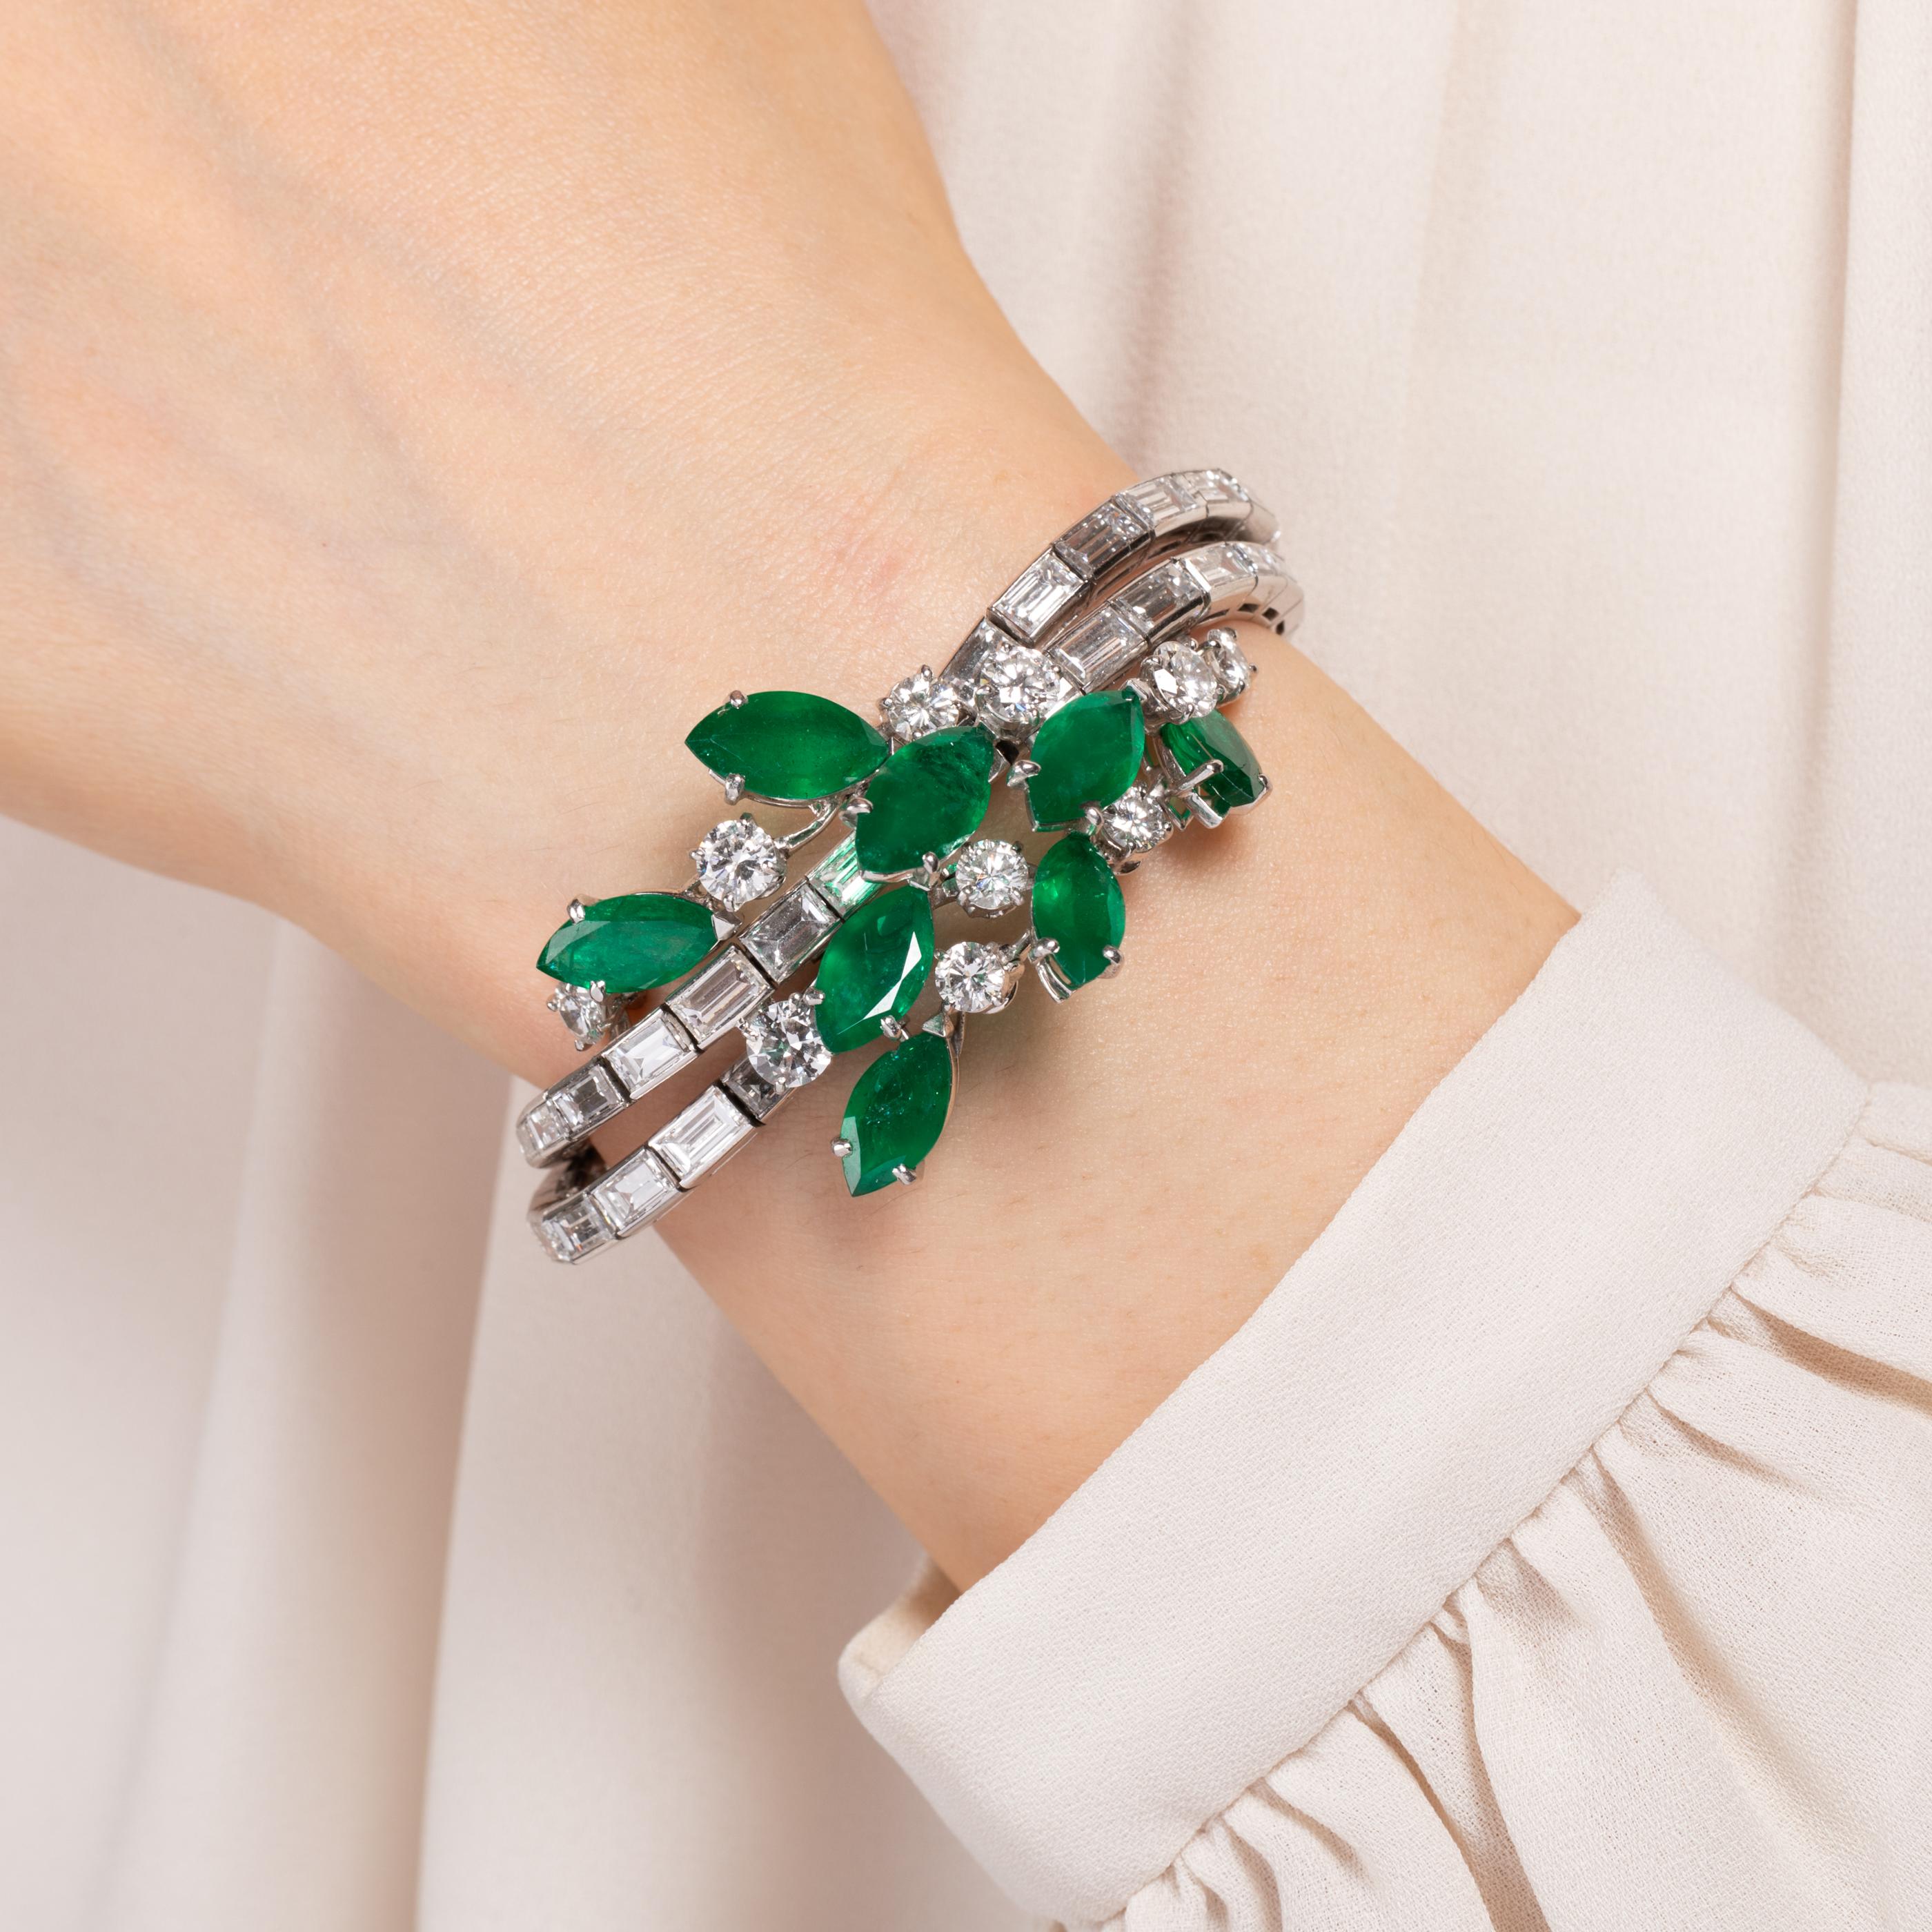 One very beautiful bracelet, French vintage made.
Made in platinum (dog head hallmarks) and set with quality diamonds and emeralds.
The diamonds weights 10 carats at least and the emeralds 10 carats approximately.
The size is 14 cm
Total weight: